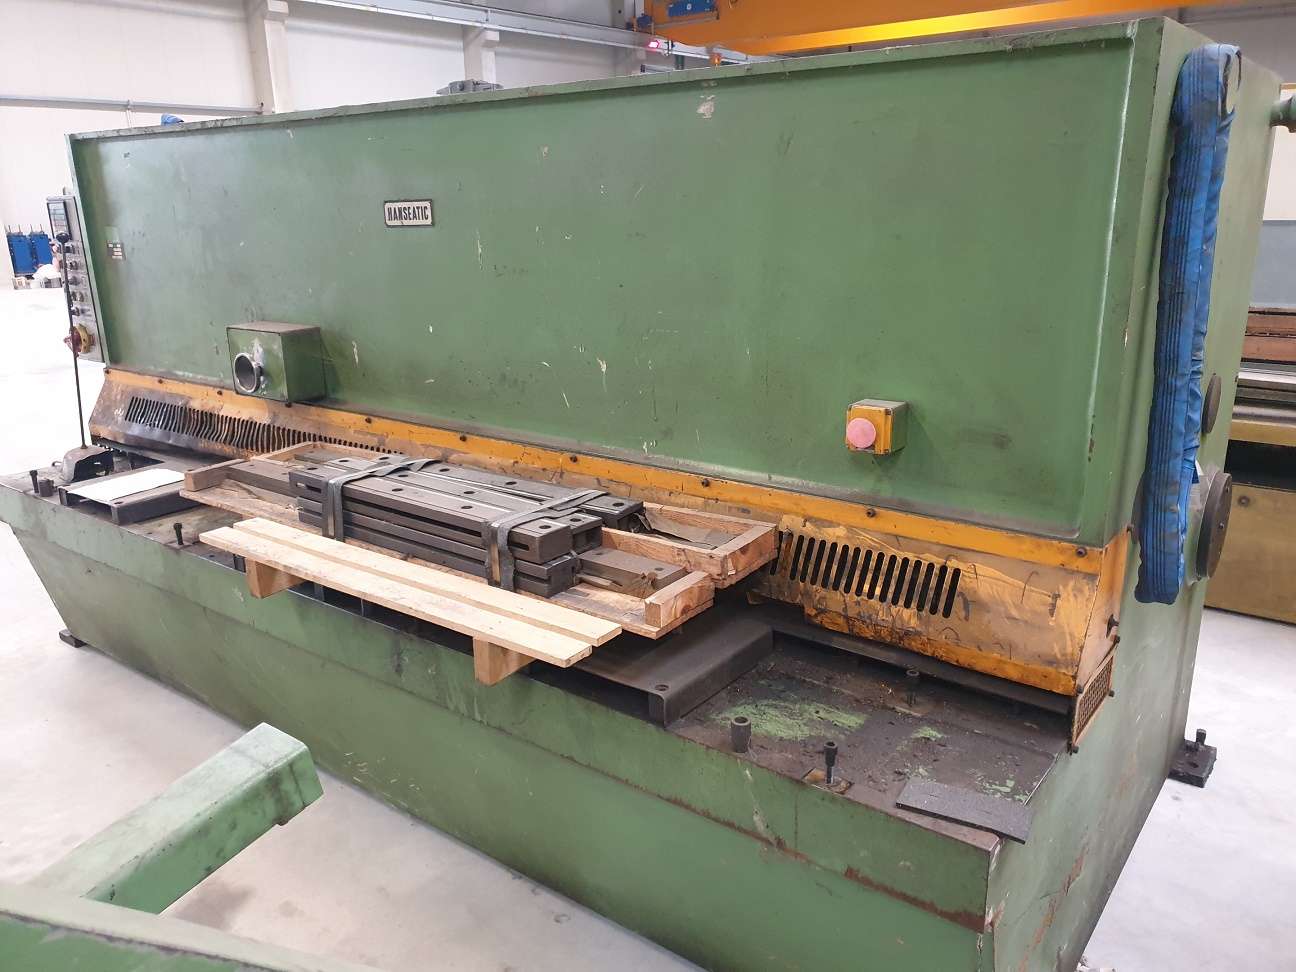 Hydraulic guillotine shear  Hanseatic HS 10-3100 photo on Industry-Pilot